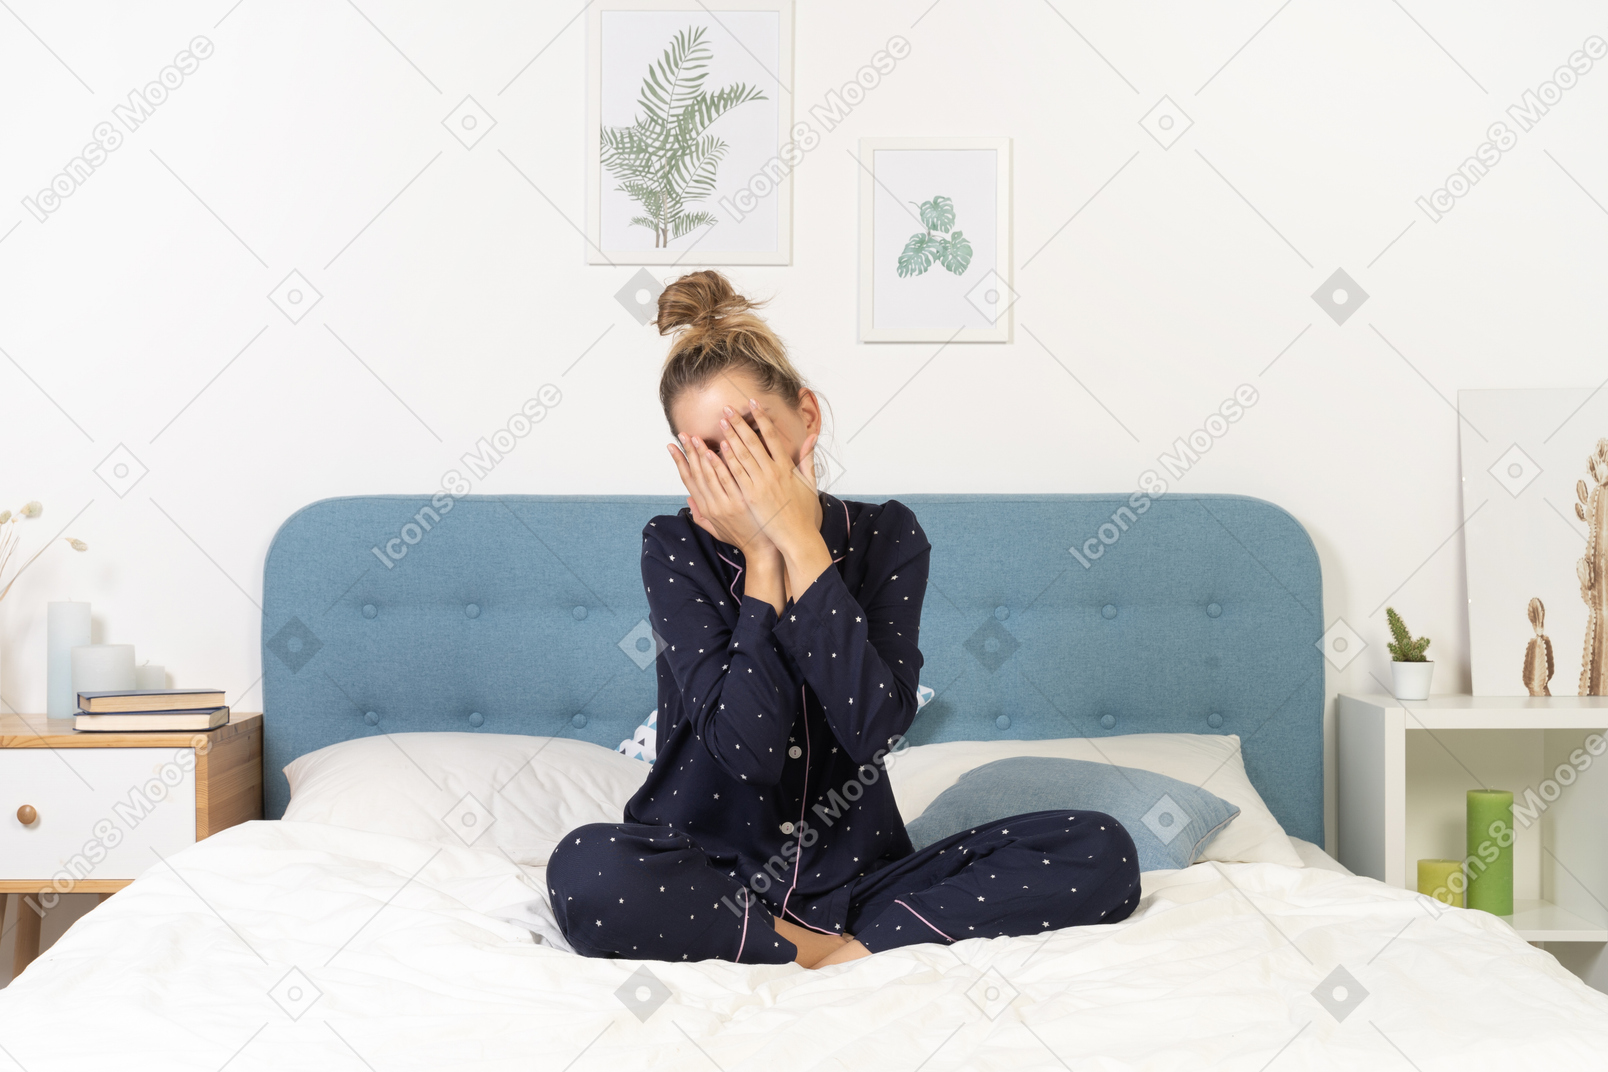 Front view of a young woman in pajamas staying in bed and hiding face